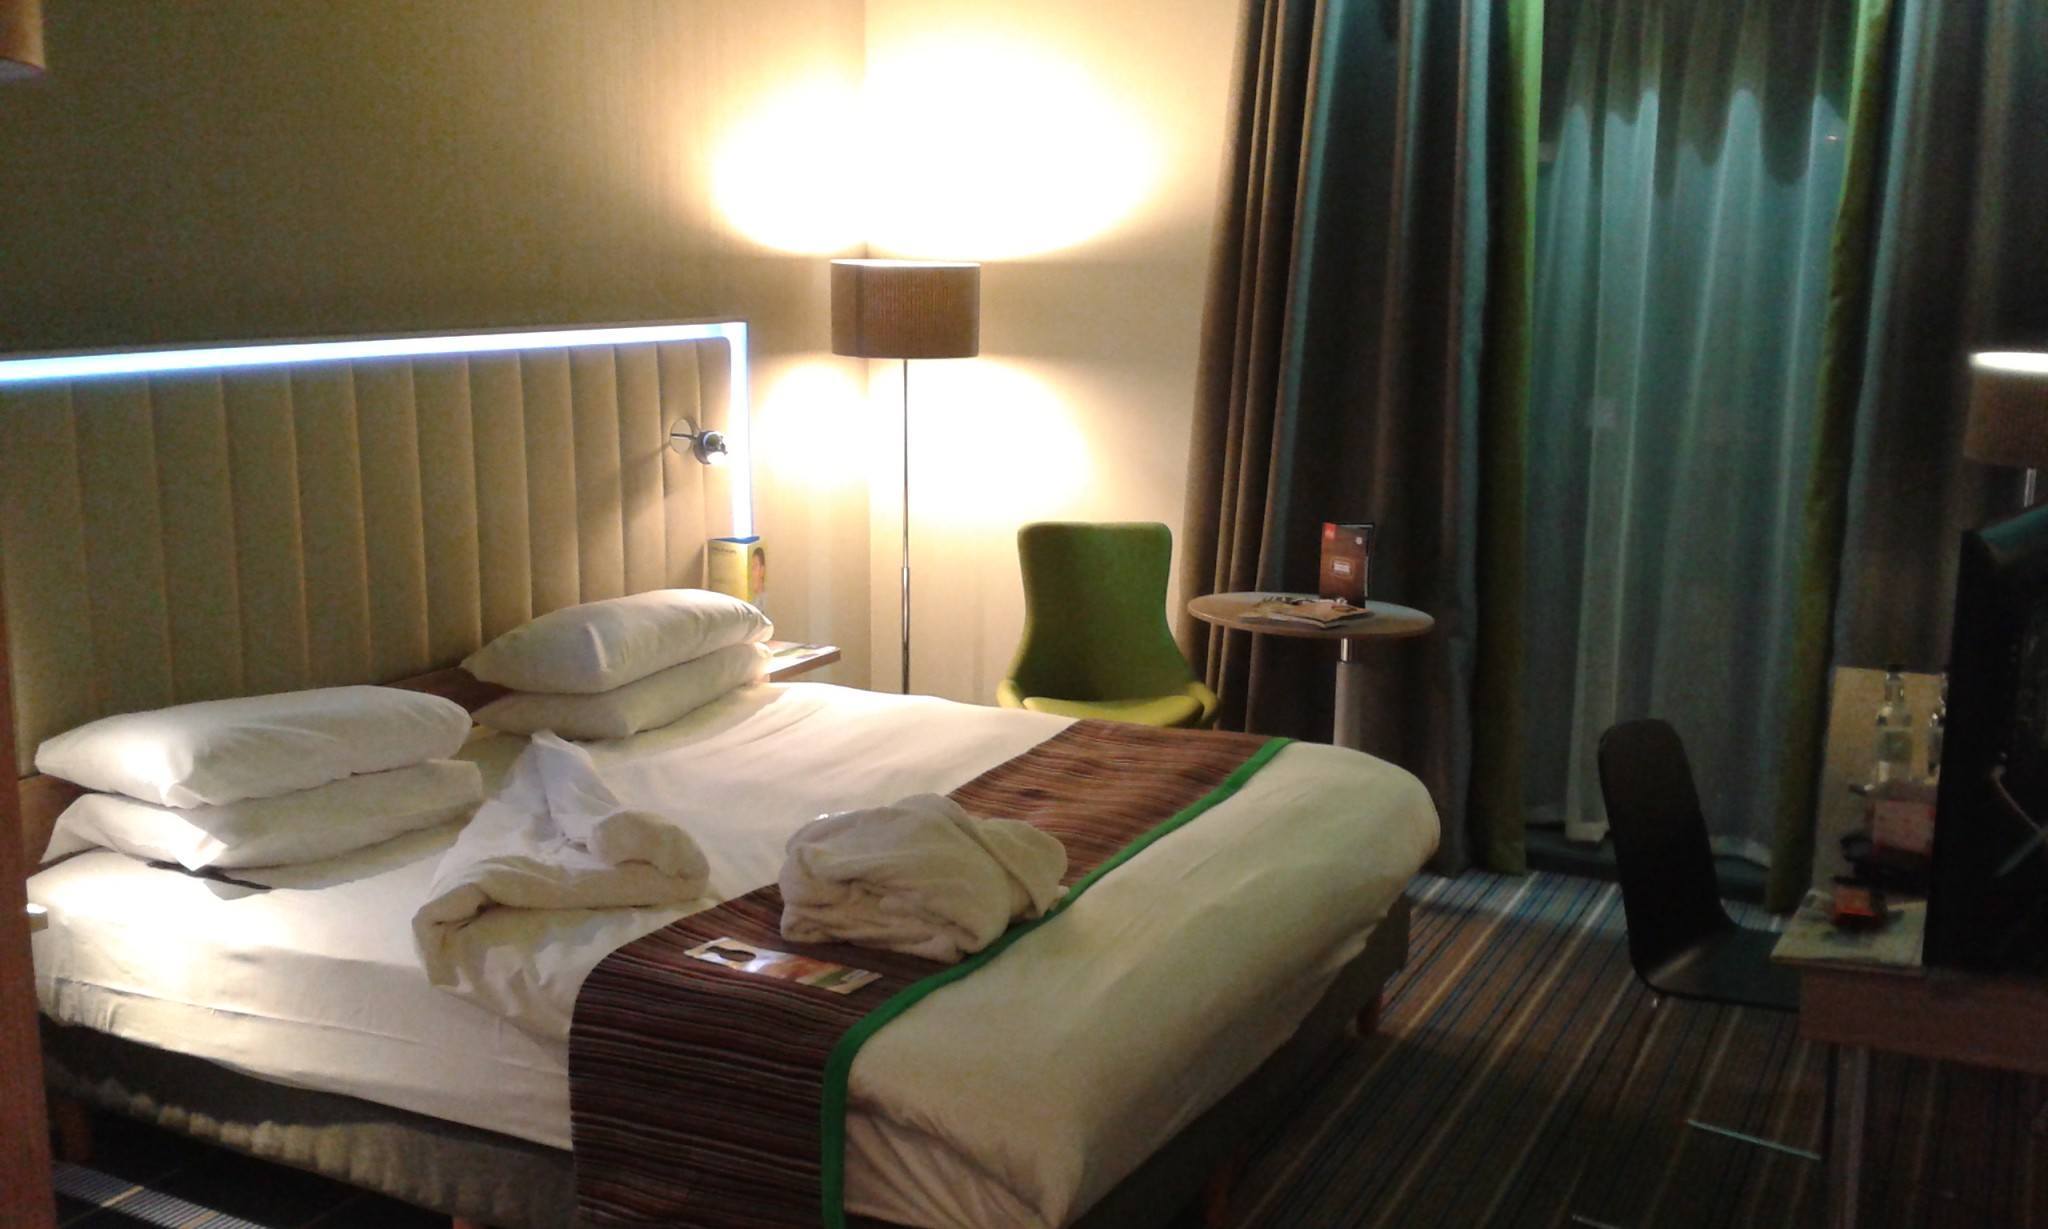 Staying at the Park Inn By Radisson in Manchester City Centre, England